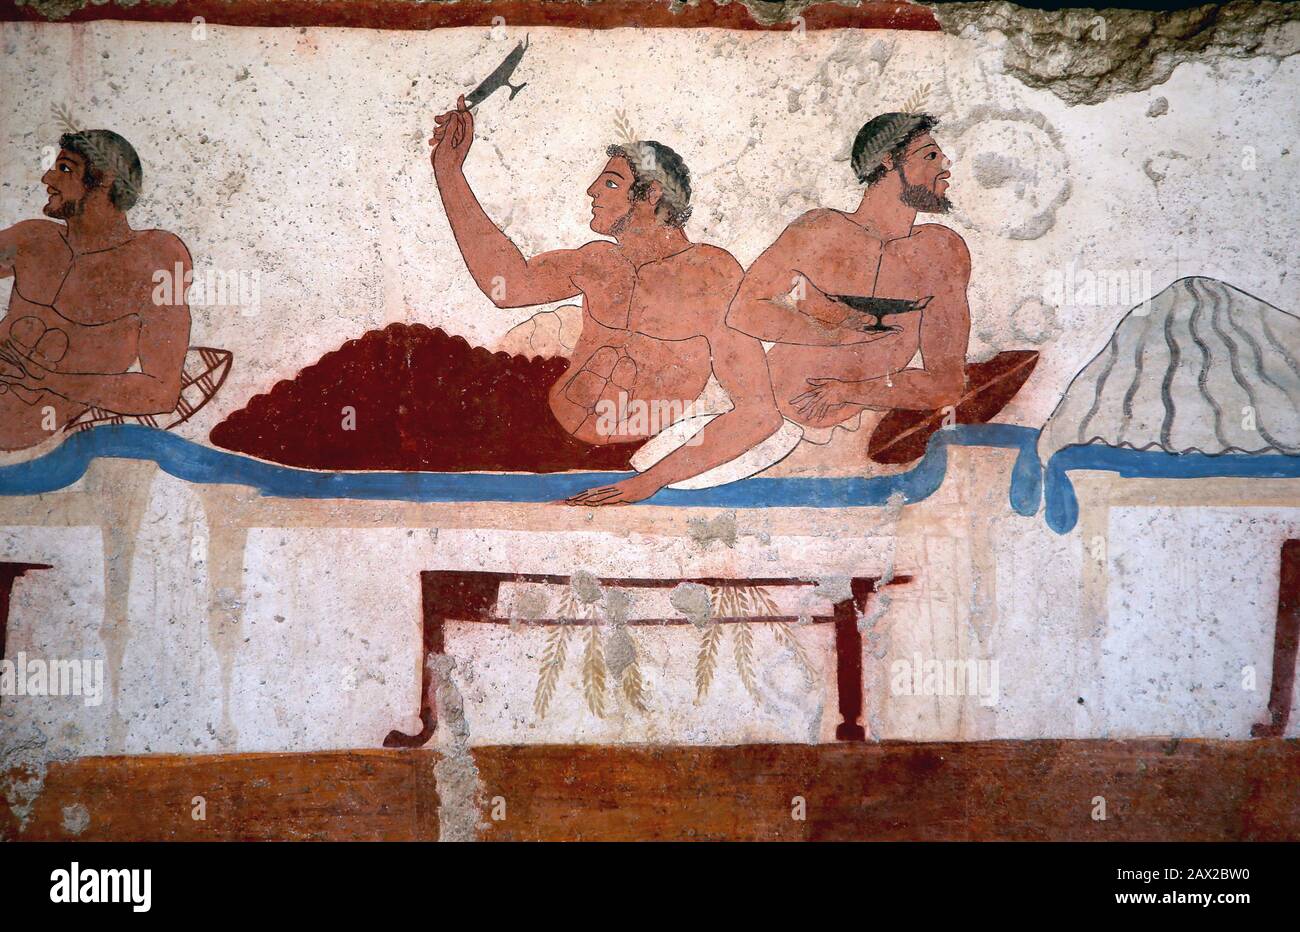 Tomb of the diver, North wall fresco. Detail. Drinking feast scene with men. 480 BC. Greek Art. Paestum Archaeological Museum,  Italy. Stock Photo